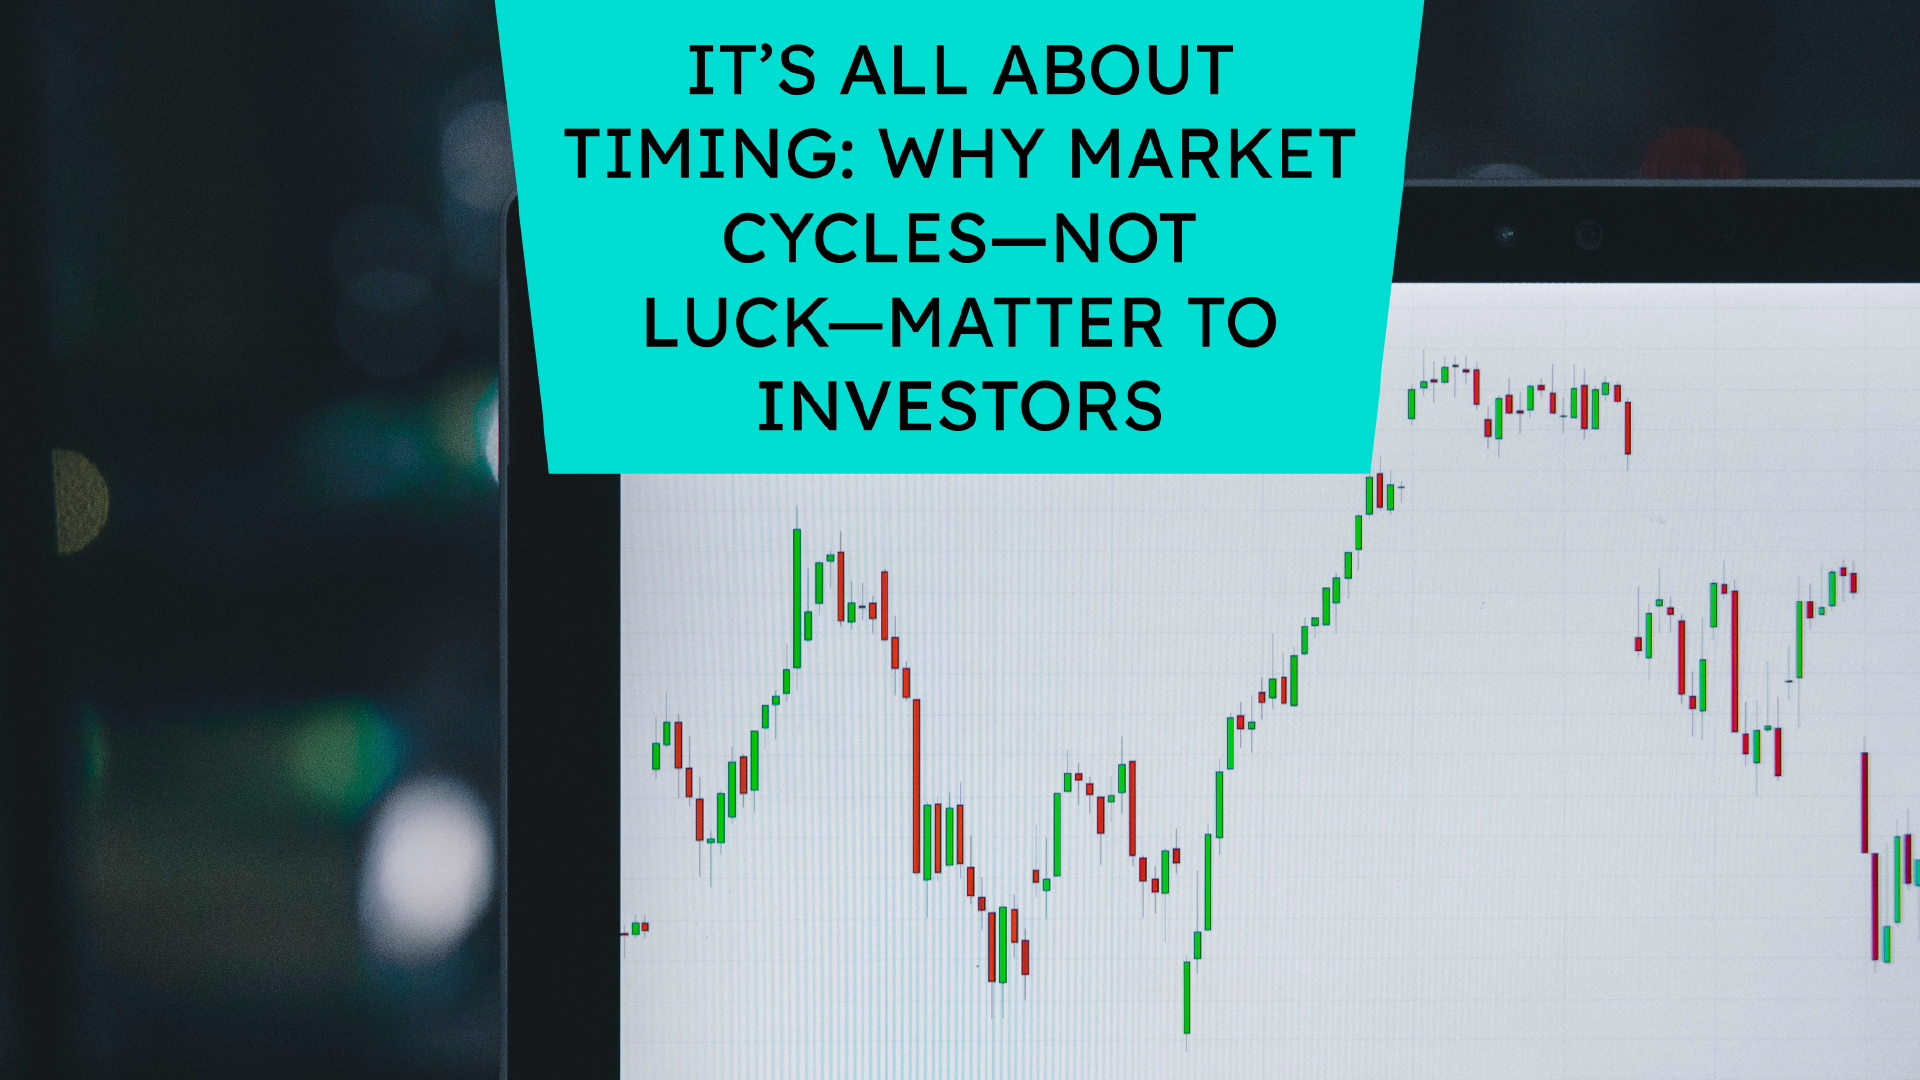 It’s All About Timing: Why Market Cycles—Not Luck—Matter to Investors